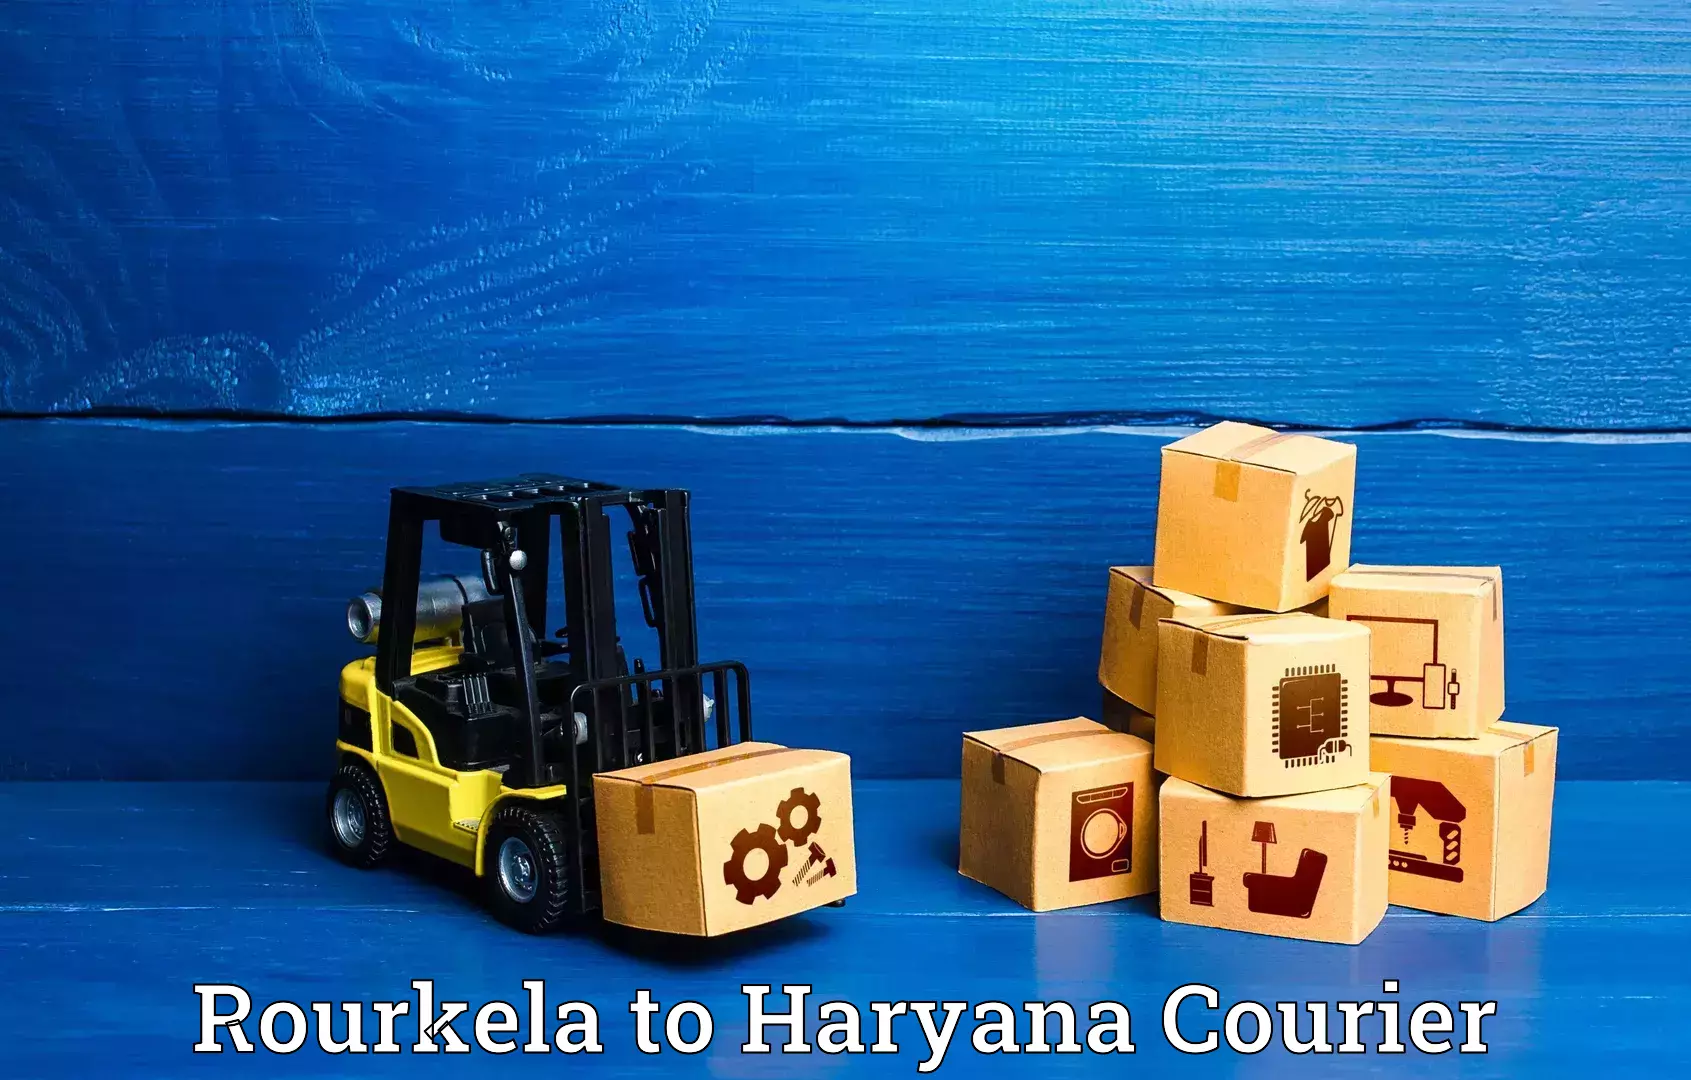 Baggage delivery technology Rourkela to Bilaspur Haryana